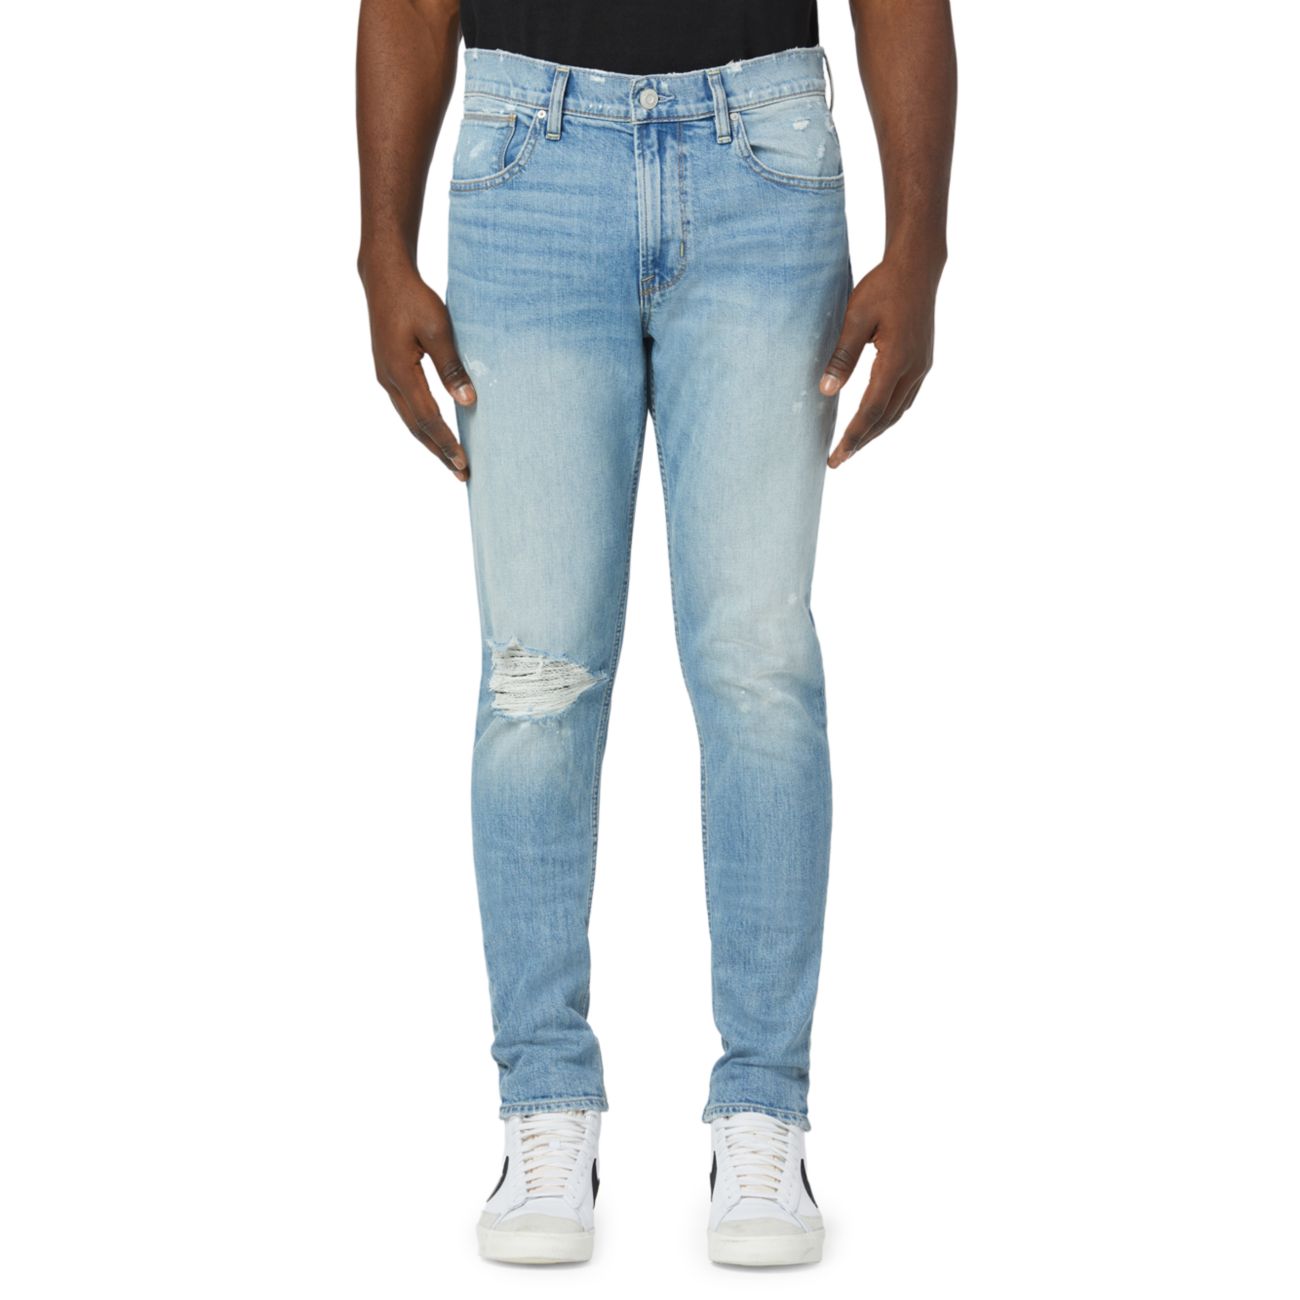 Джинсы-скинни Zack Stained Hudson Jeans